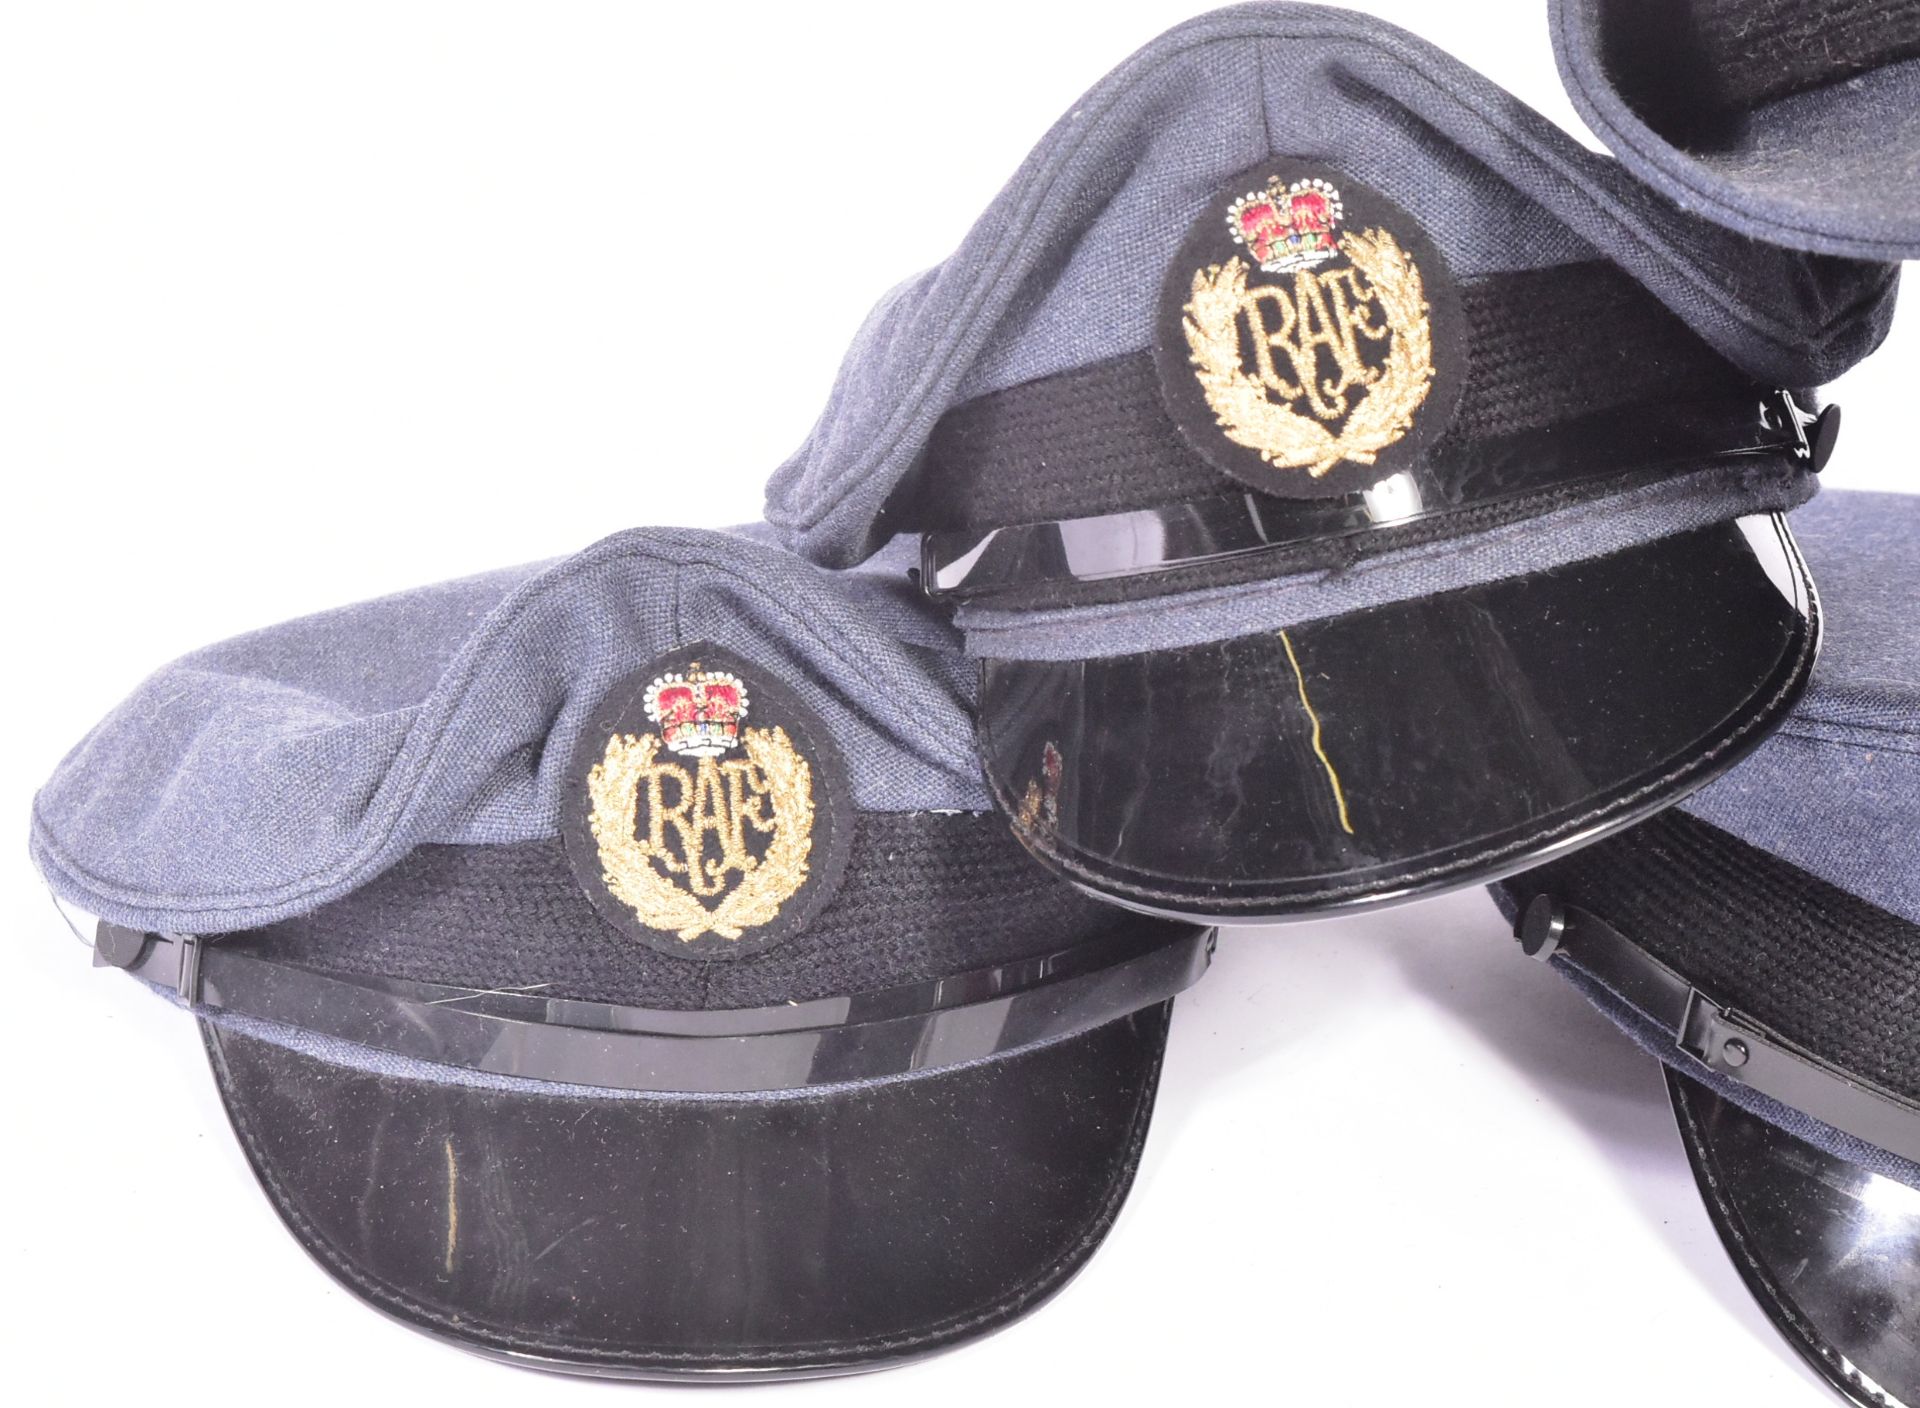 COLLECTION OF POST WAR / REENACTMENT RAF PEAKED CAPS - Image 2 of 5